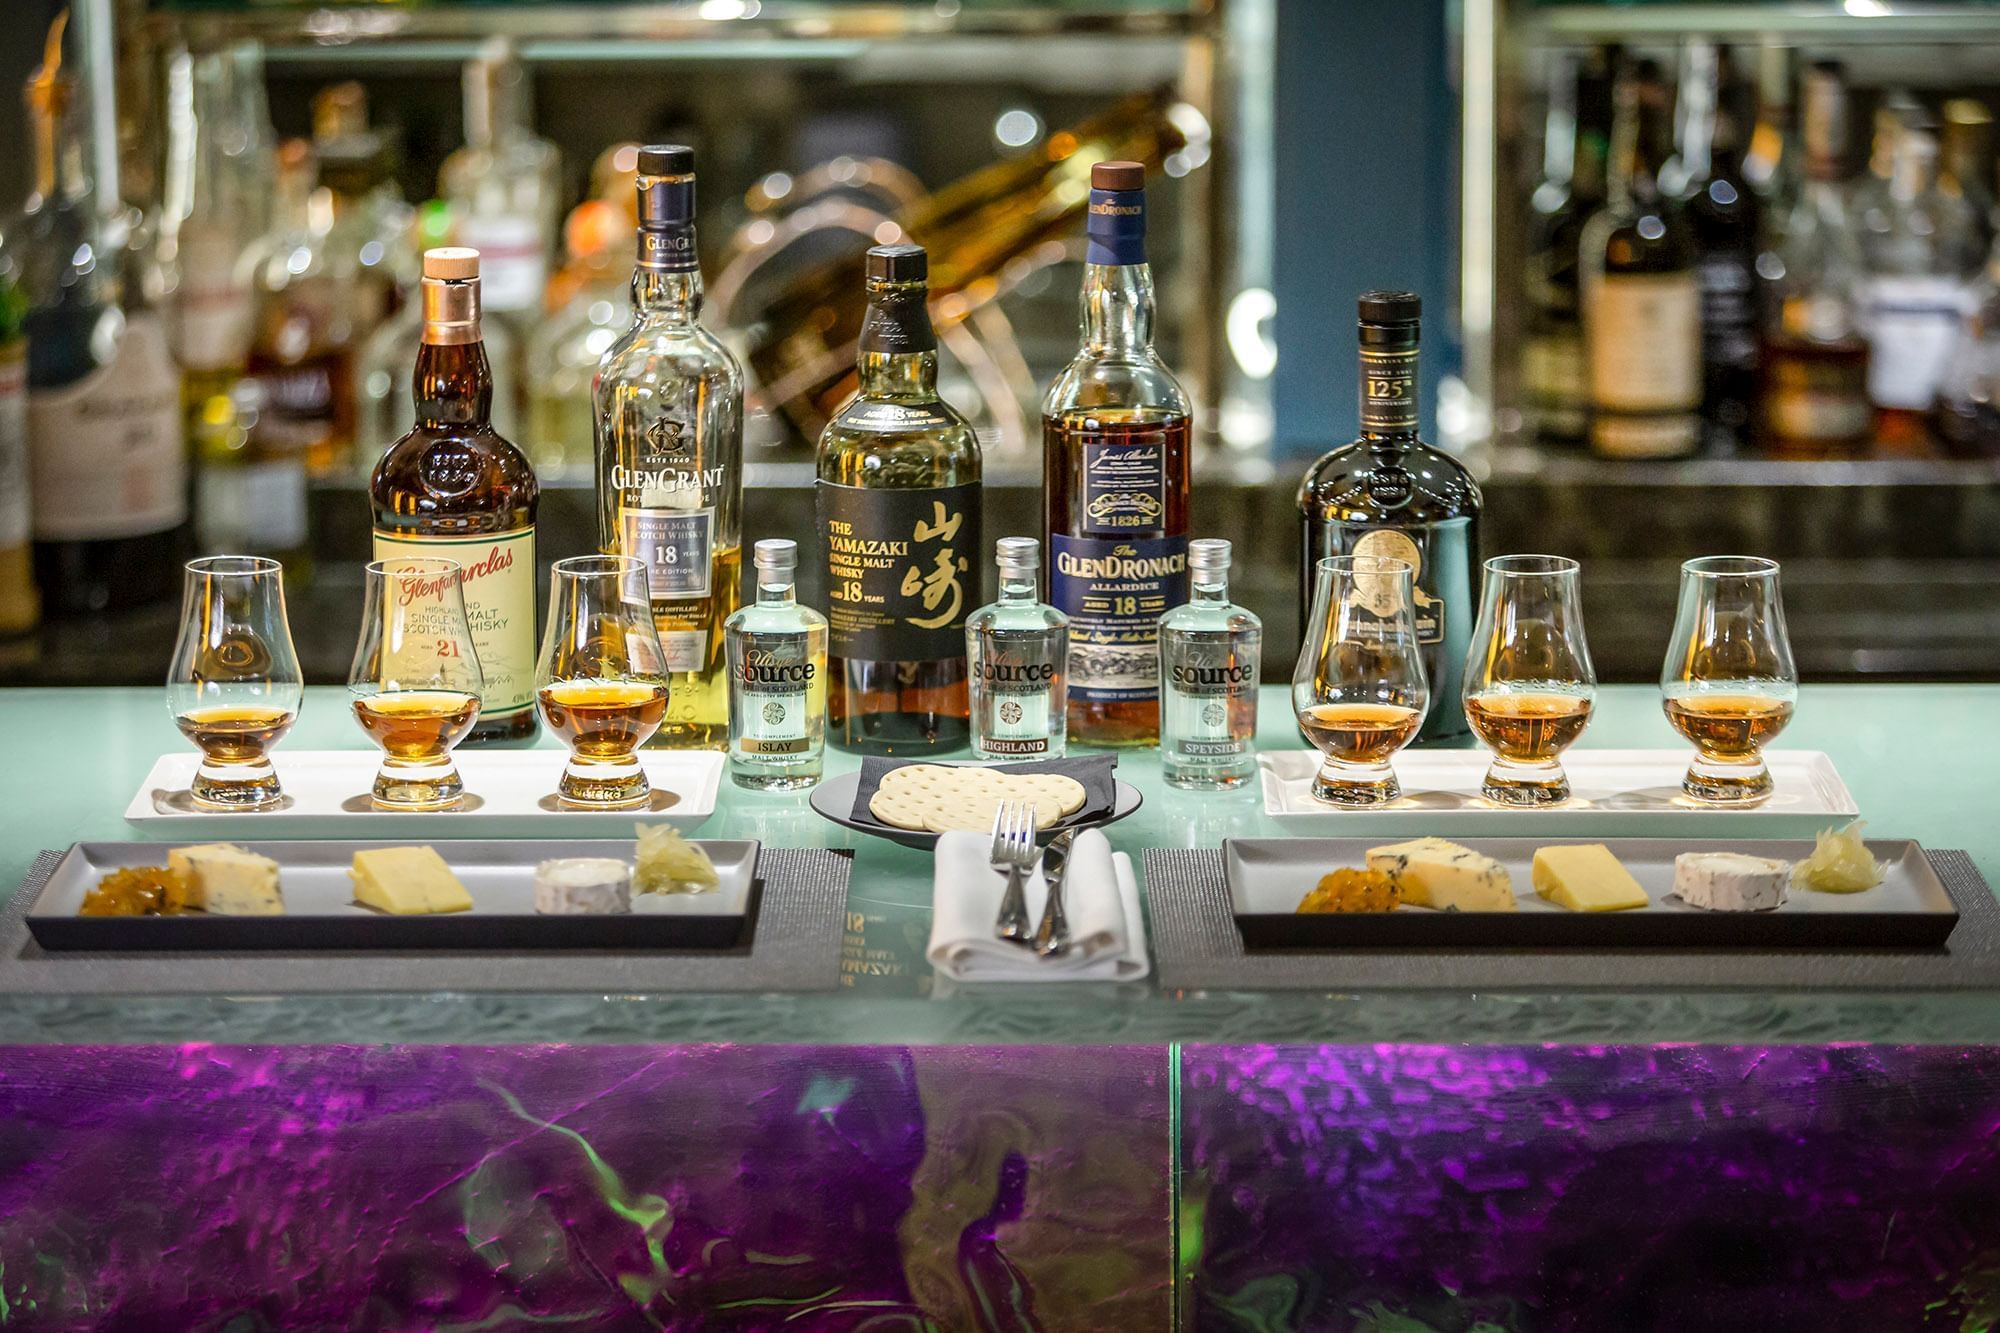 Whiskey bottles served with side dishes in Capital Hotel Bar